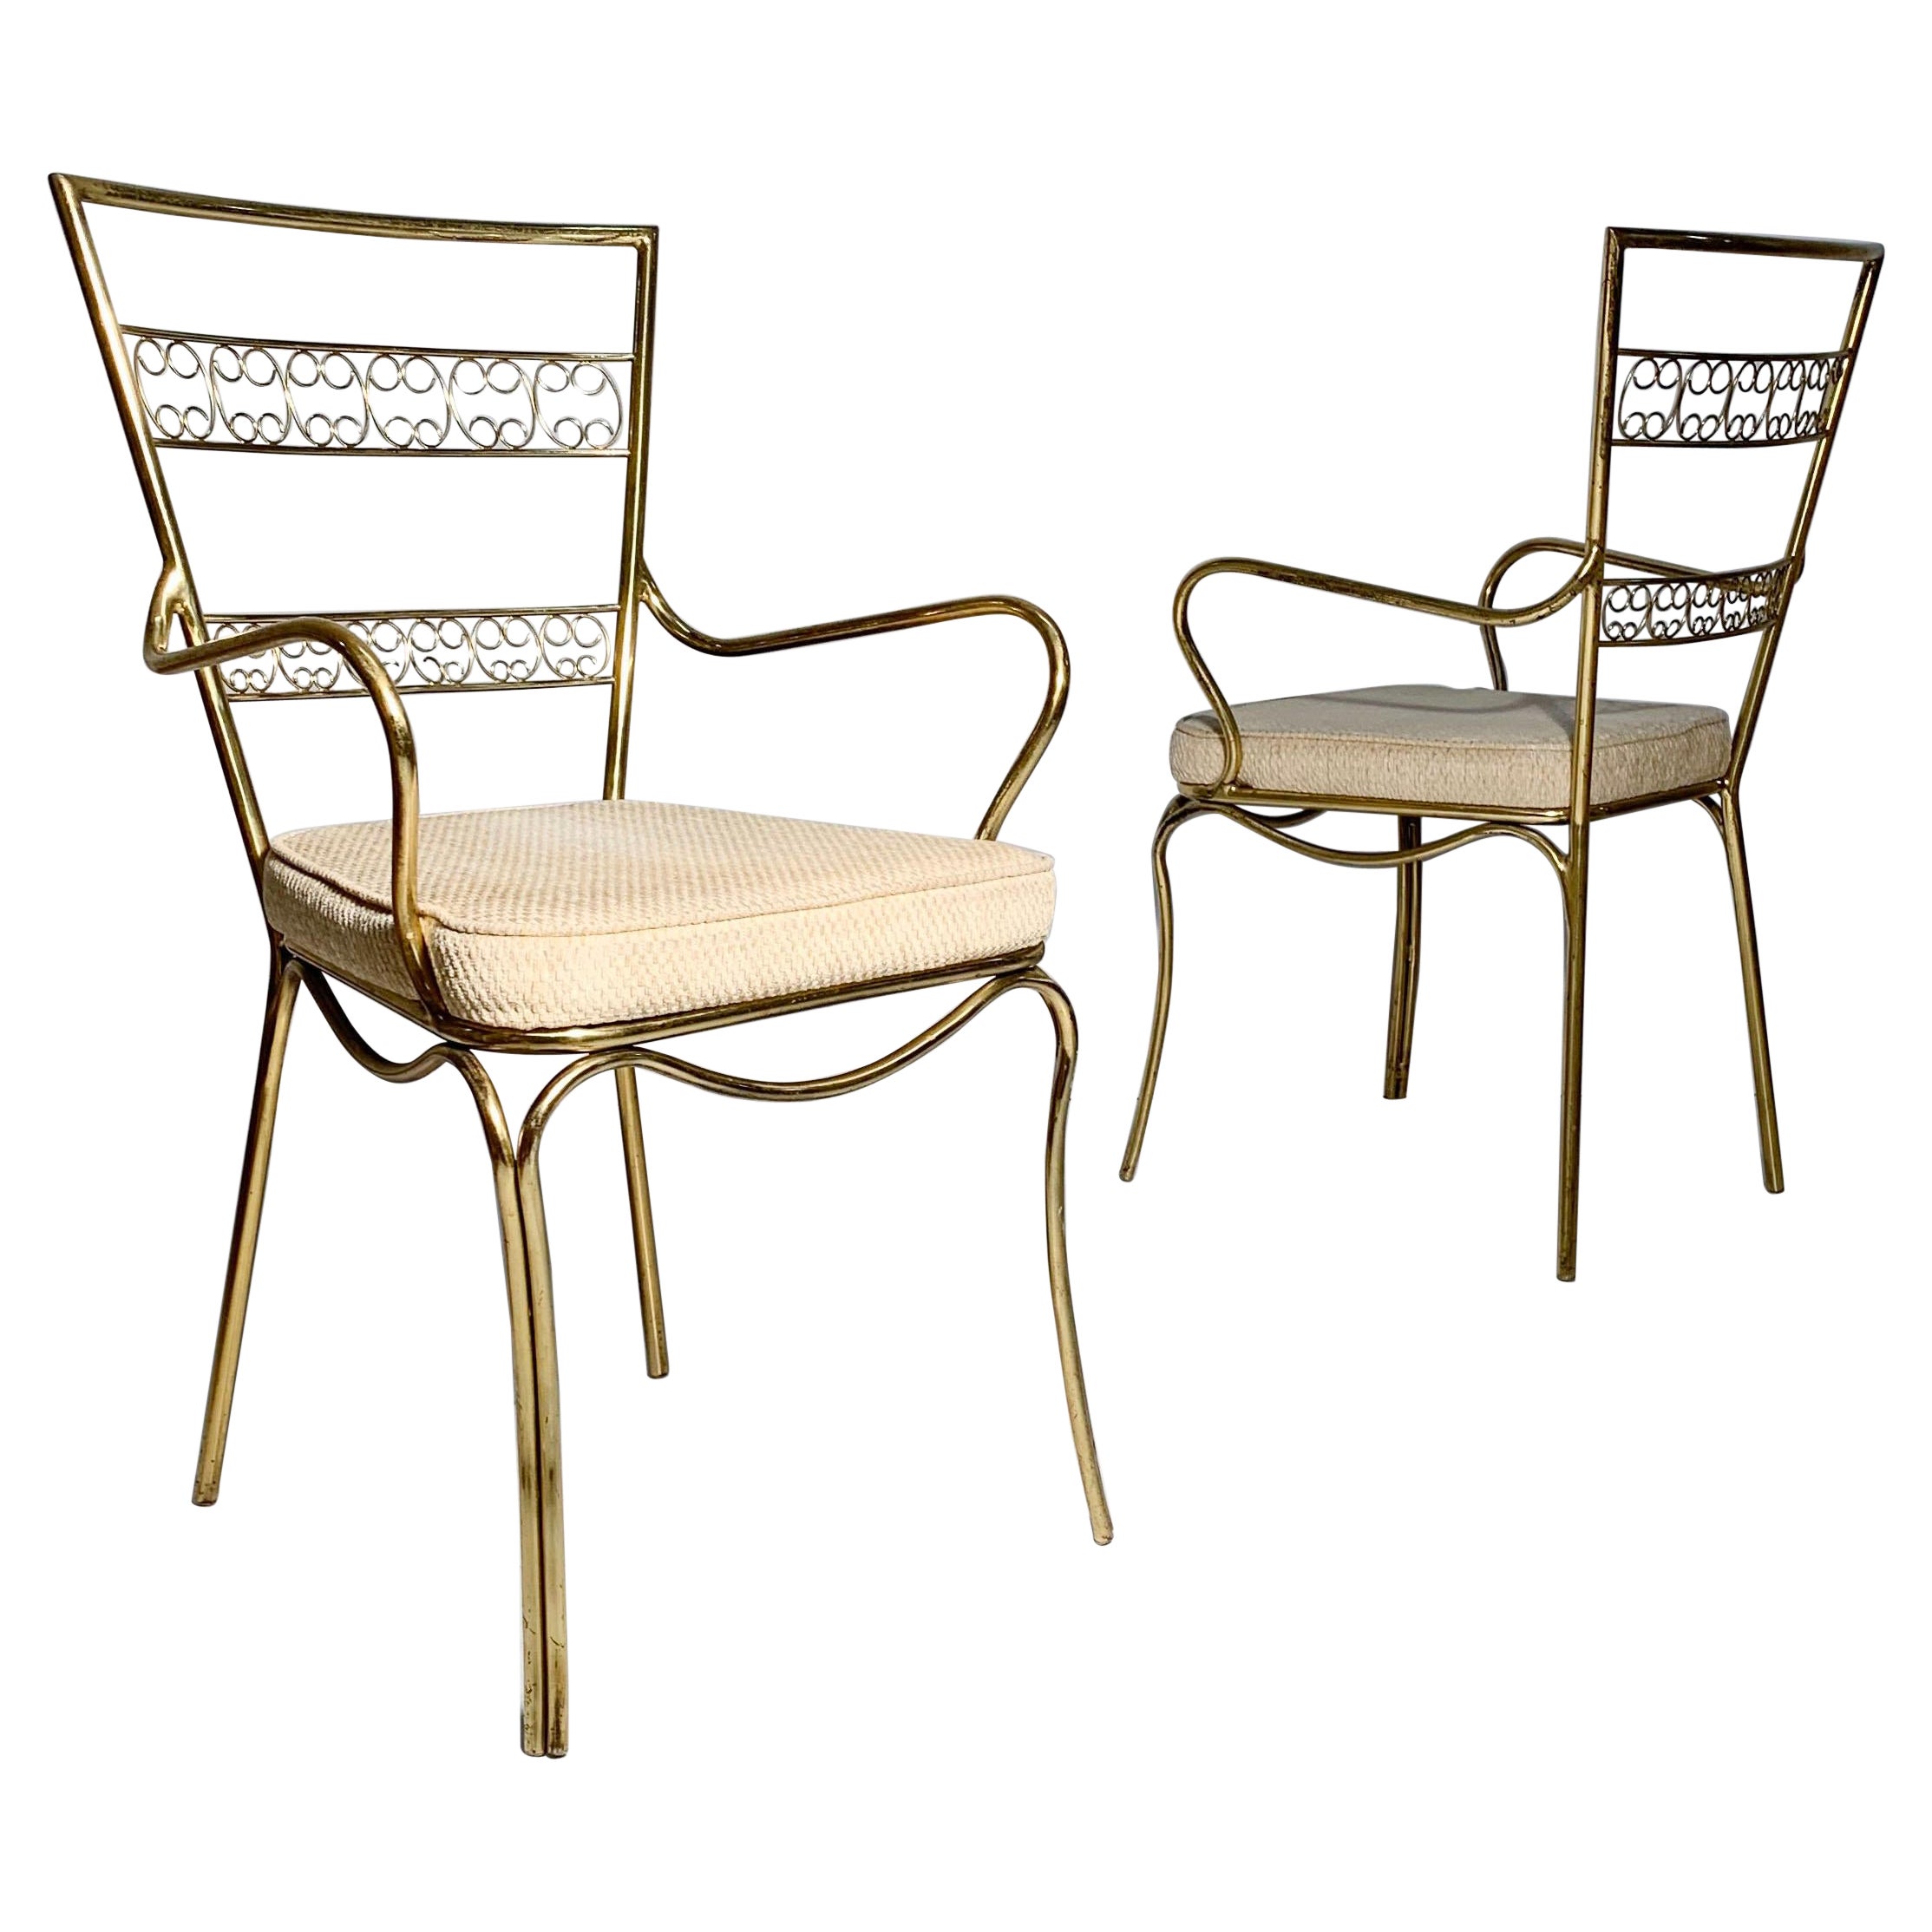 Vintage Pair of Graceful Italian Brass Chairs For Sale